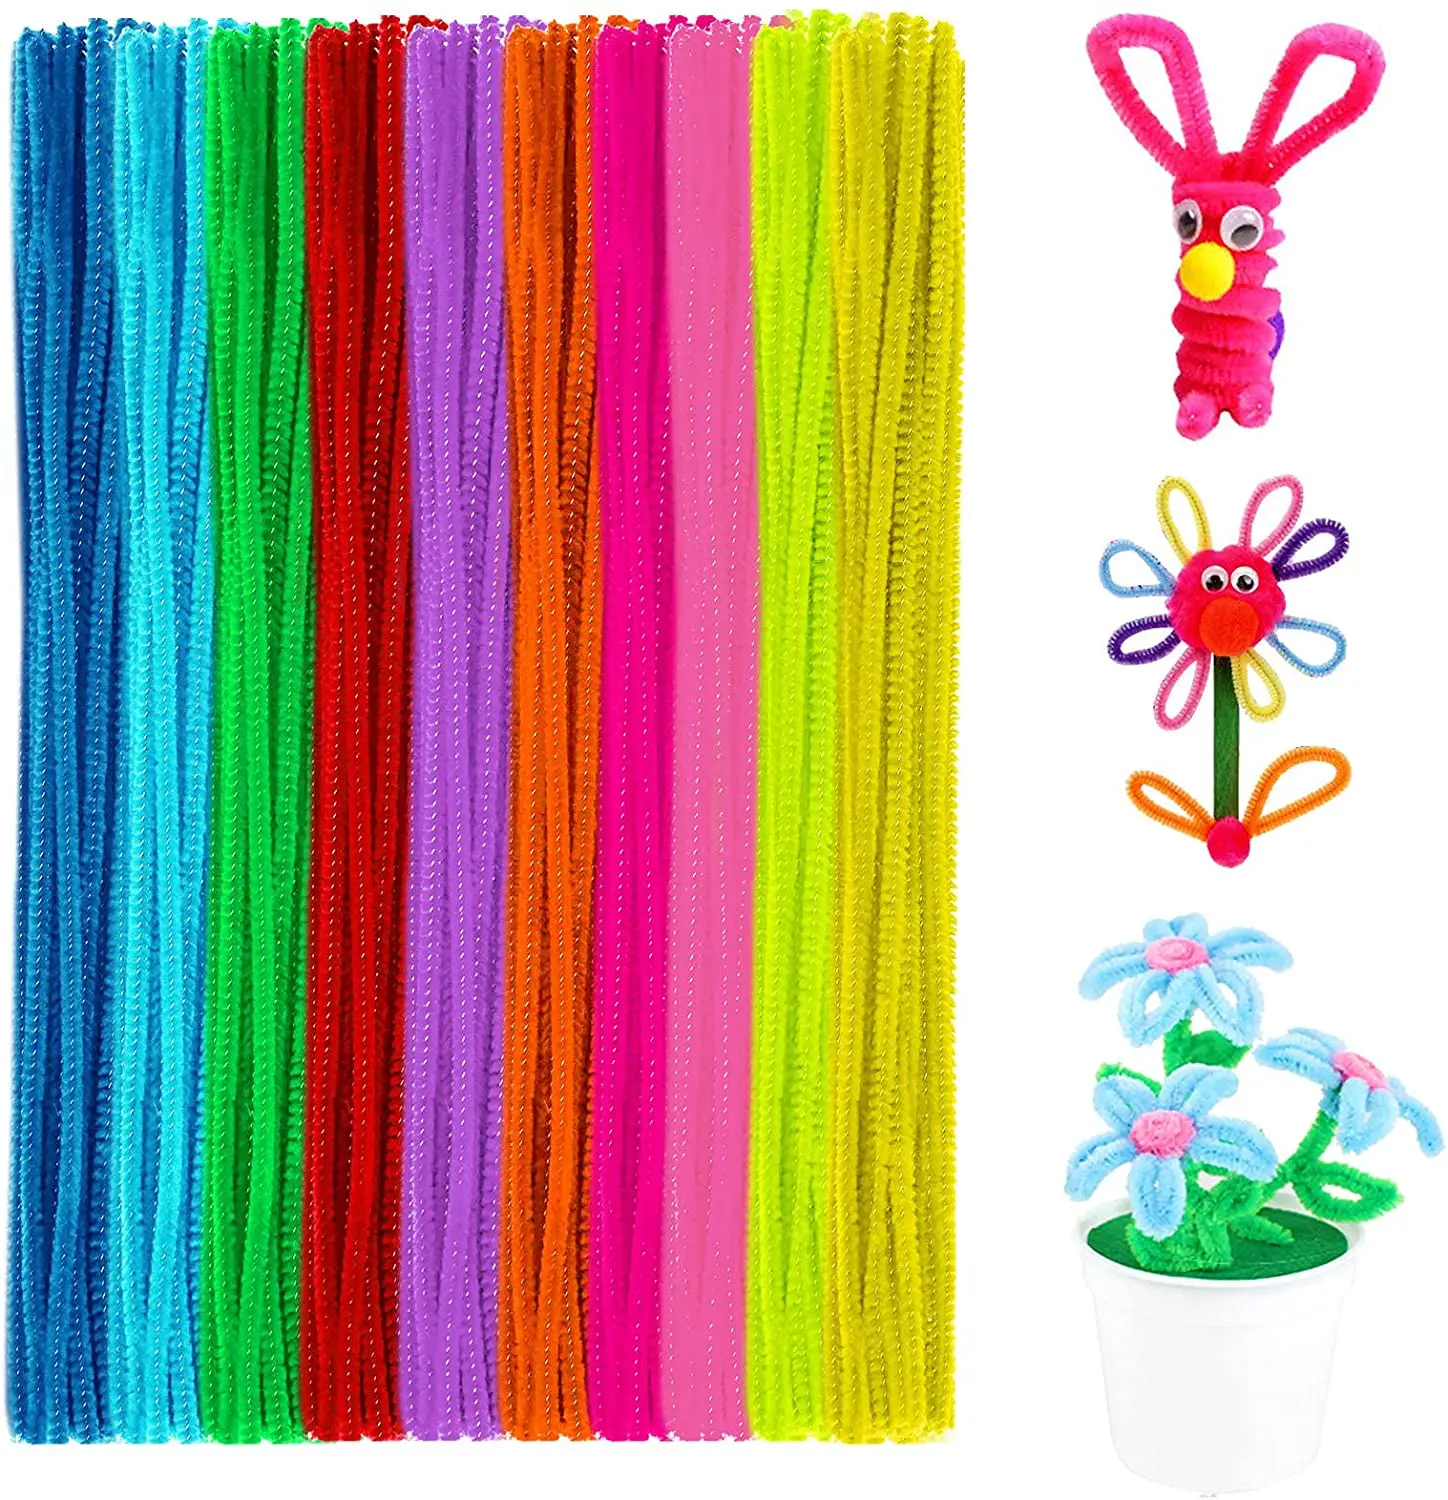 AGOOBO 500 Pcs Black Pipe Cleaners,12 inch Chenille Stems for DIY Art Creative Crafts Decorations 